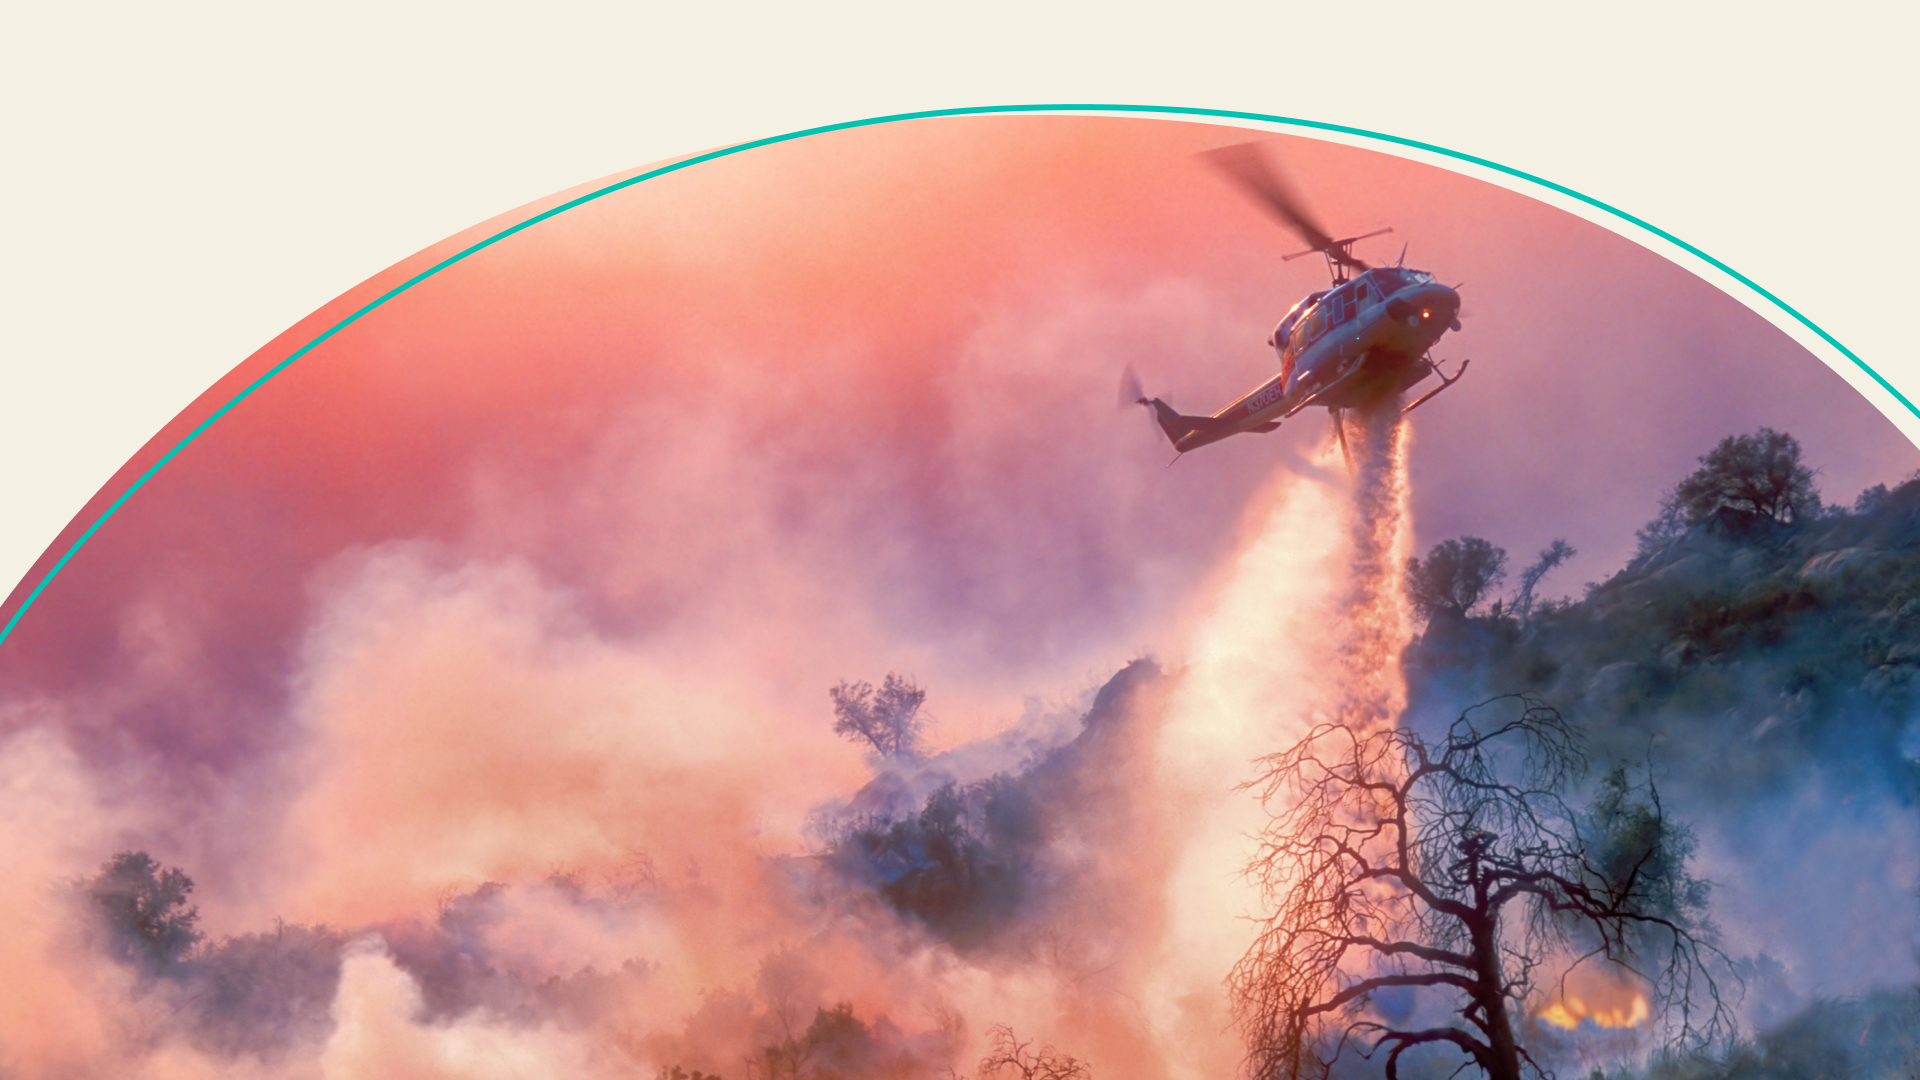 A helicopter over a wildfire